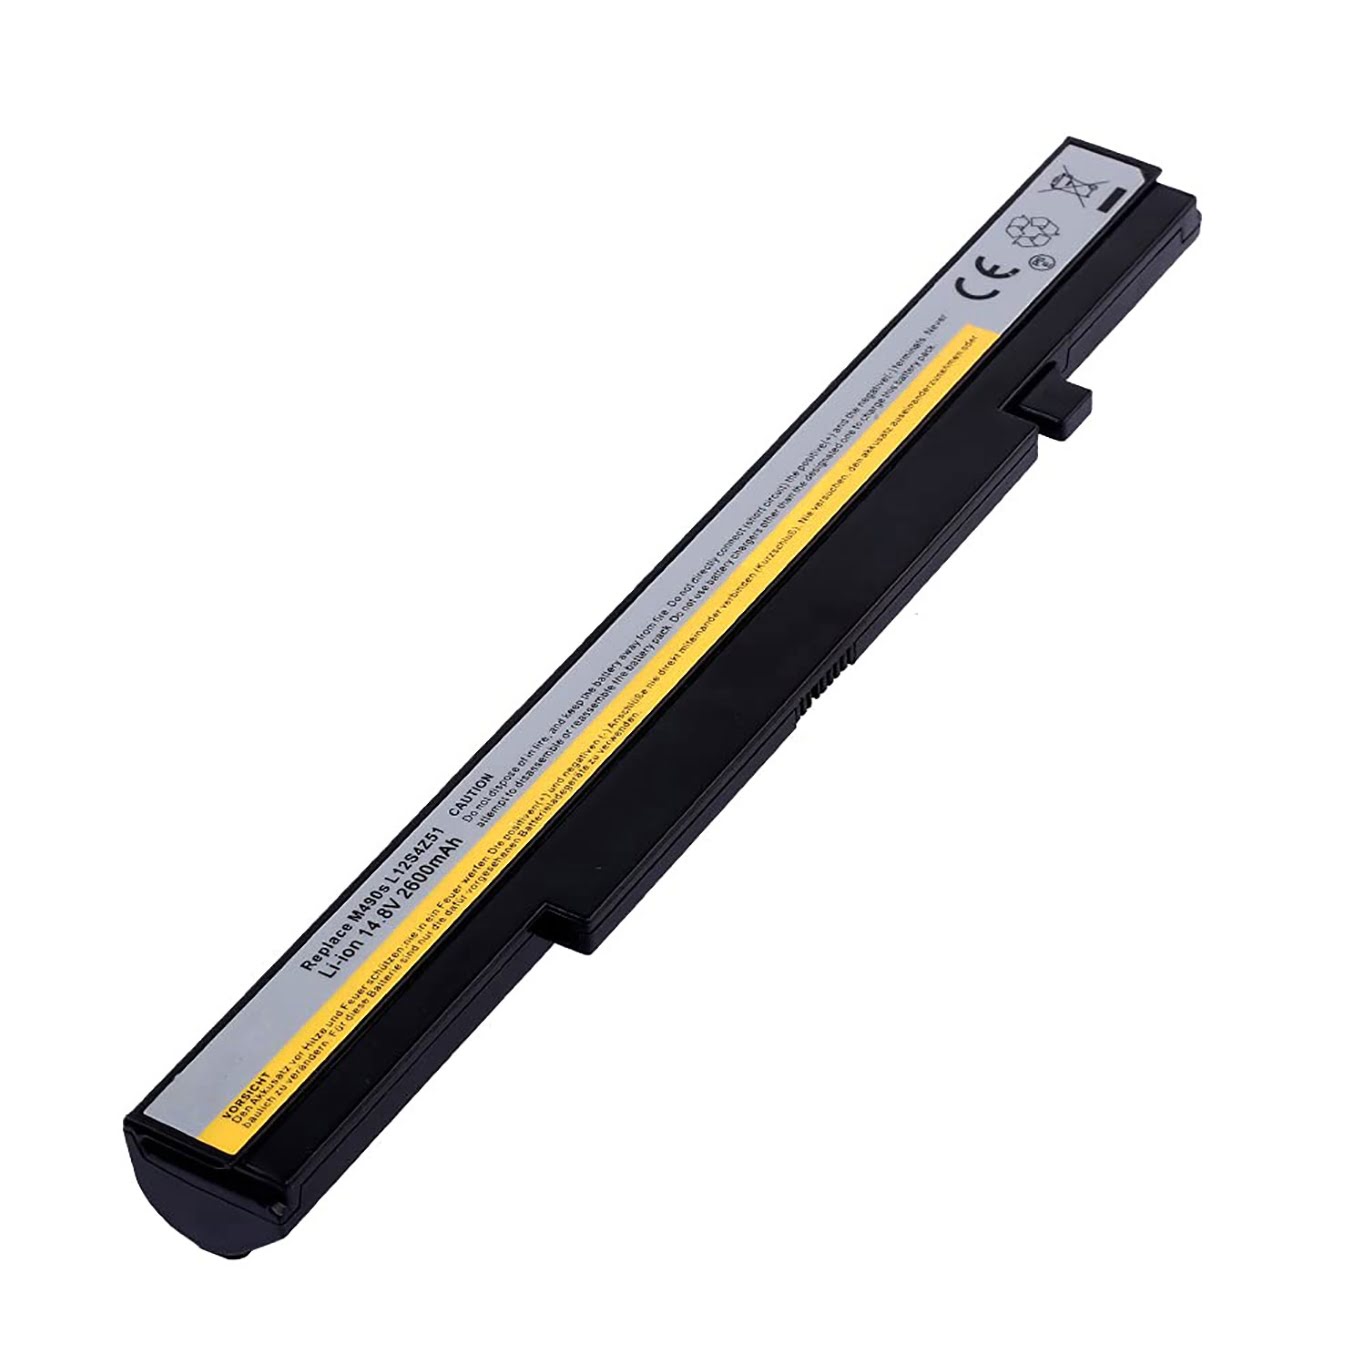 4ICR17/65, L12S4Y51 replacement Laptop Battery for Lenovo B4400, B4400S, 4 cells, 14.8V, 2200mAh